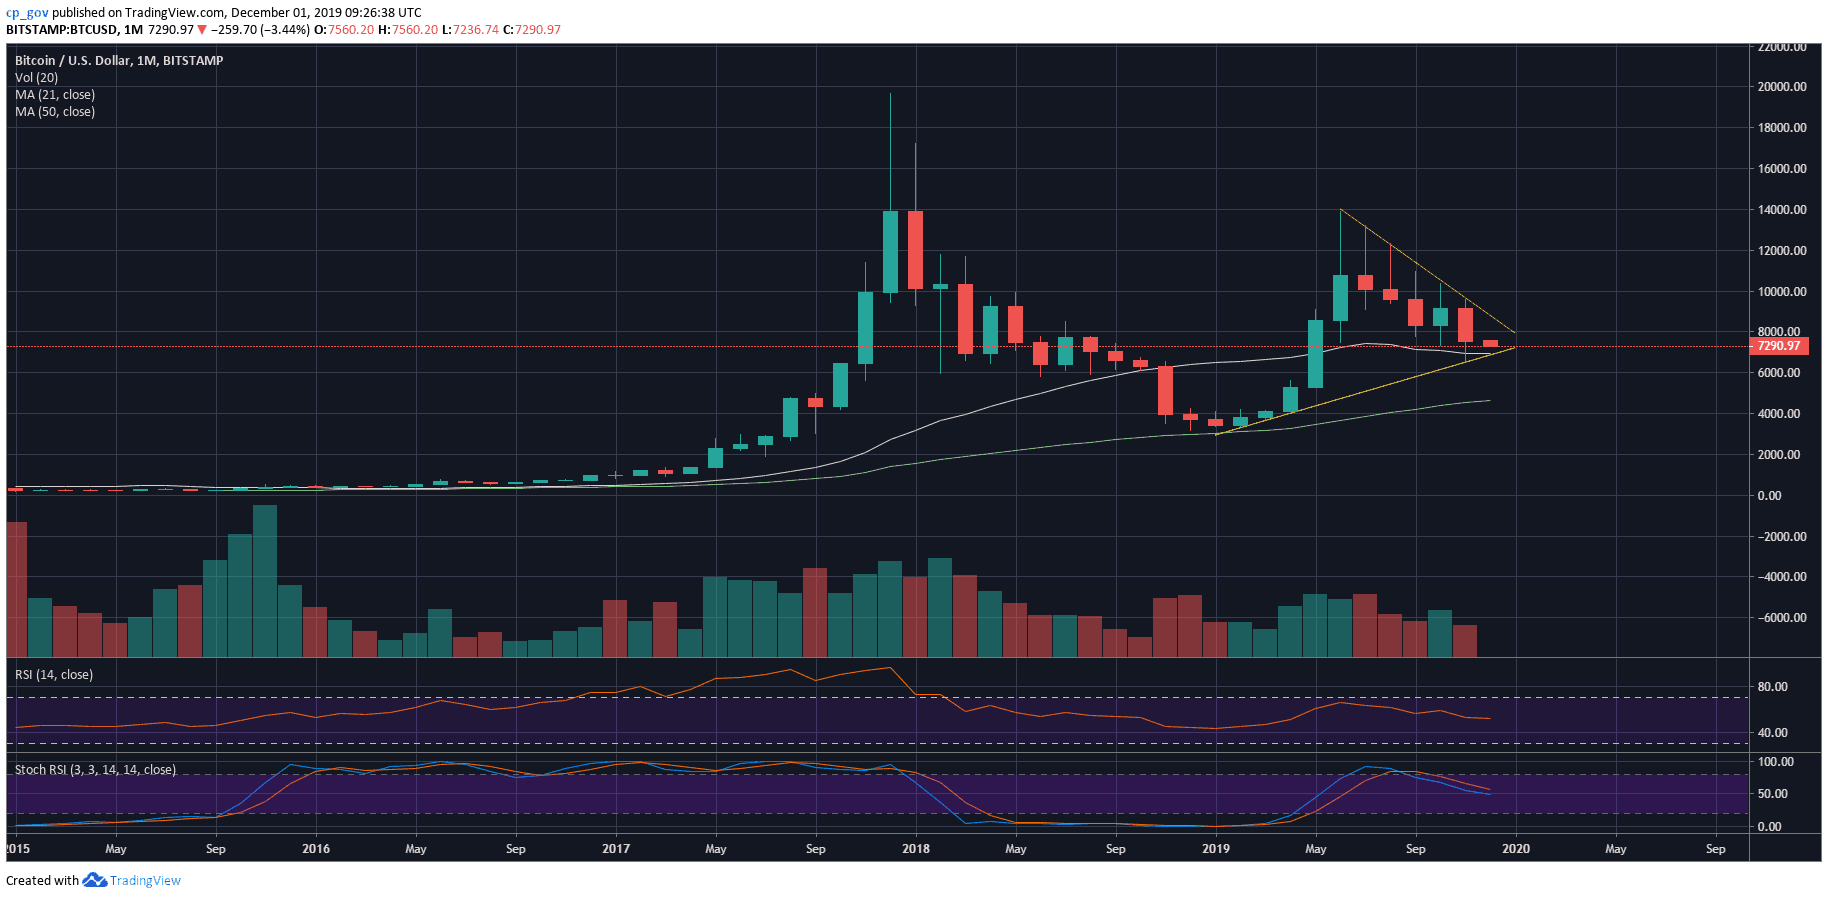 Bitcoin Price Analysis: November’s Candle Ended Very Bearish, What Does It Mean For December?